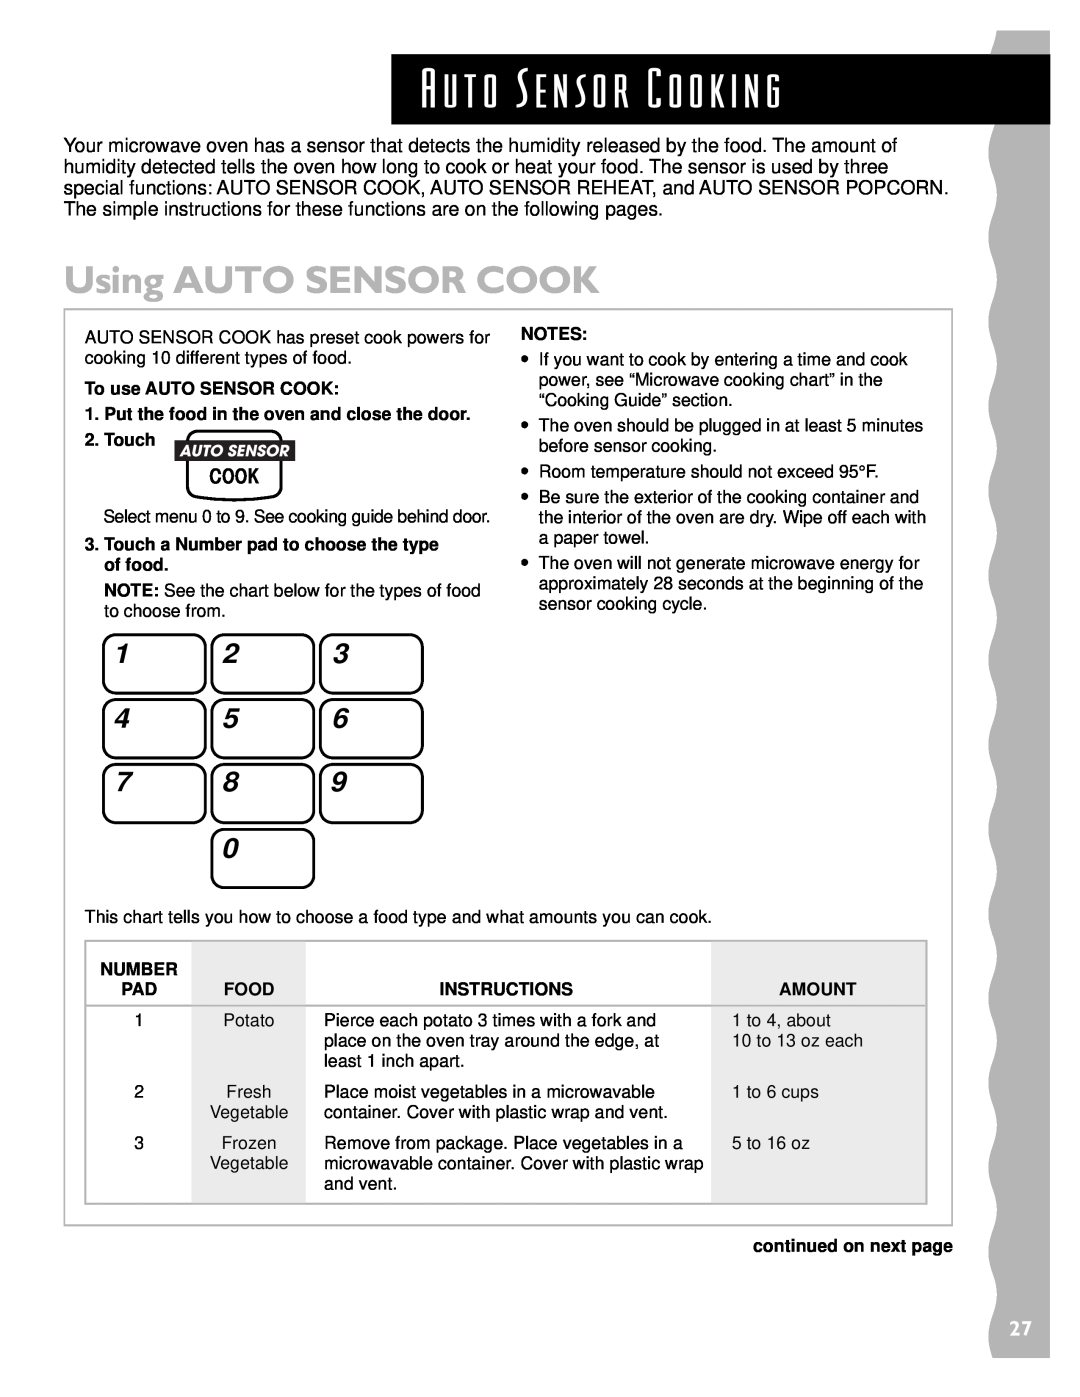 KitchenAid KCMS135H installation instructions A u t o S e n s o r C o o k i n g, Using AUTO SENSOR COOK, Cook, 1 2 4 5 7 8 